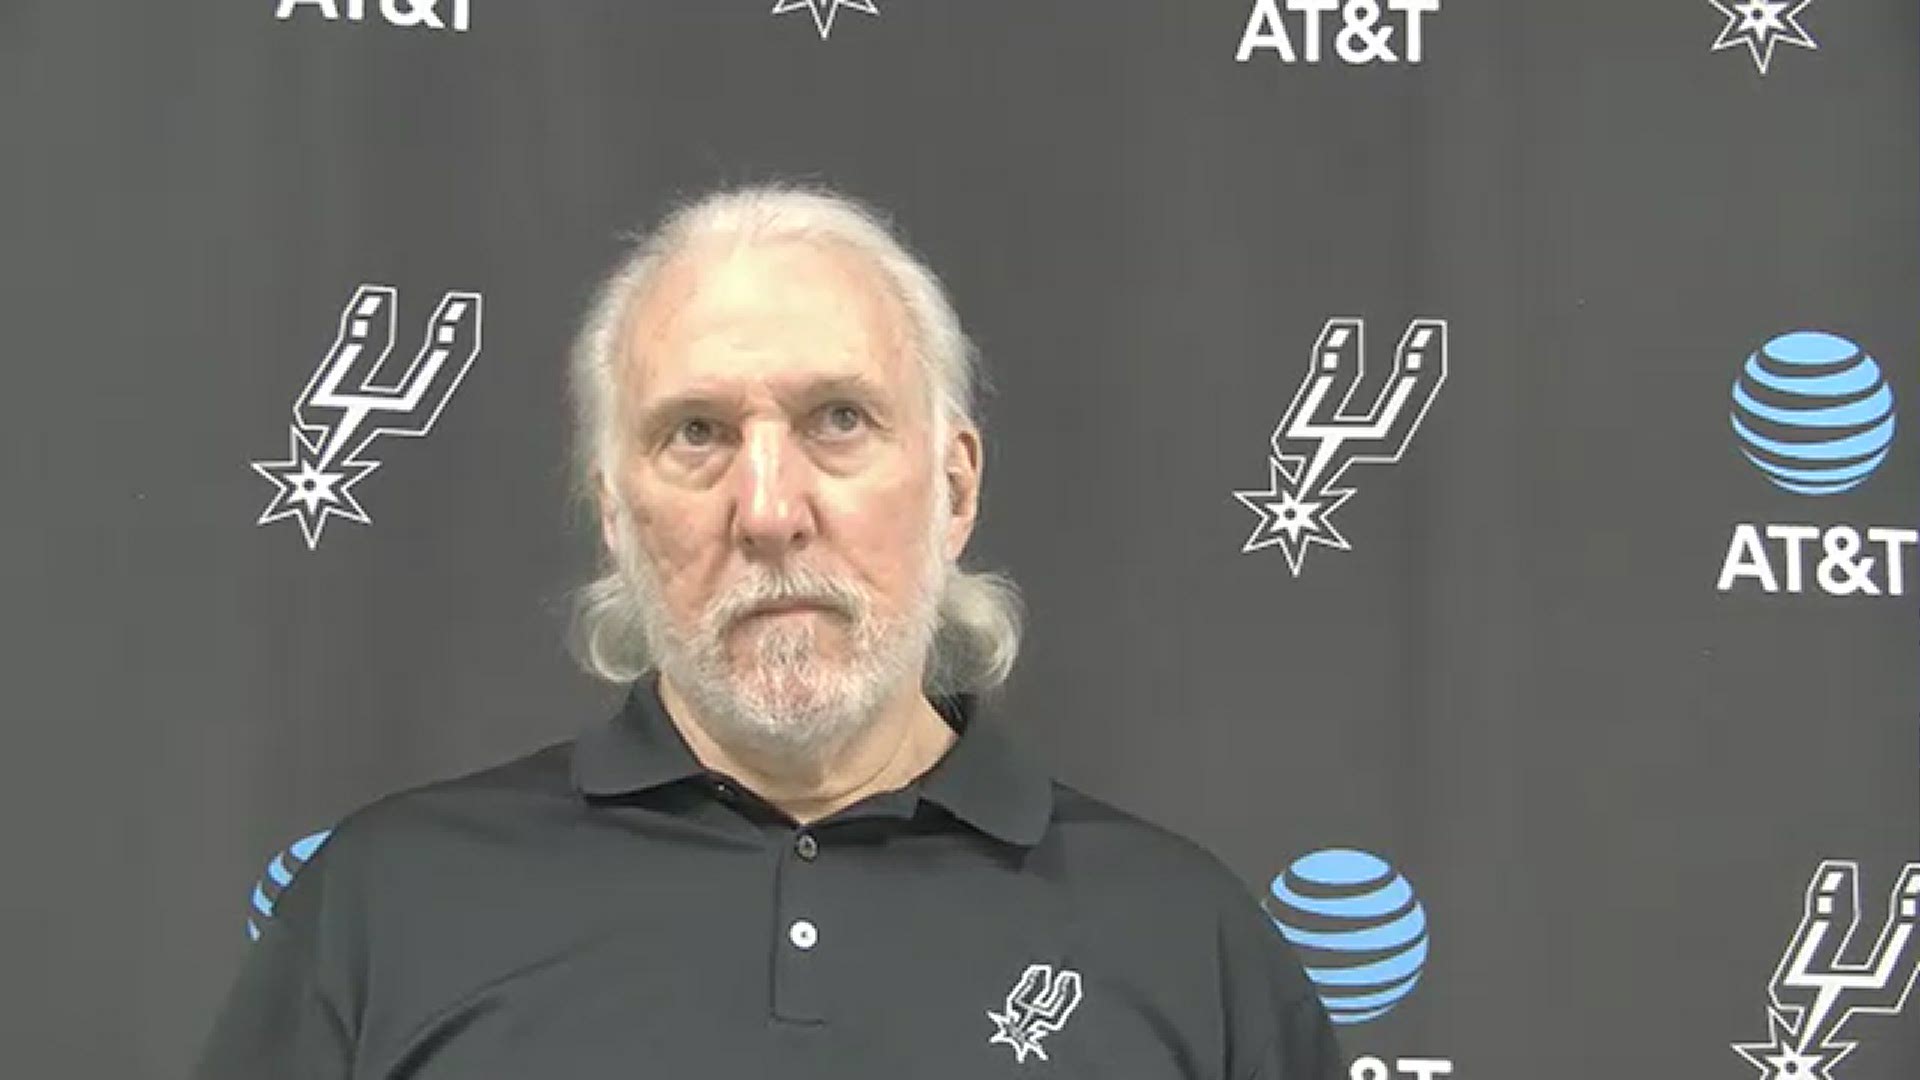 Pop said that it was a good bounce-back game, and praised Devin Vassell, Jakob Poeltl, and Drew Eubanks after the game.